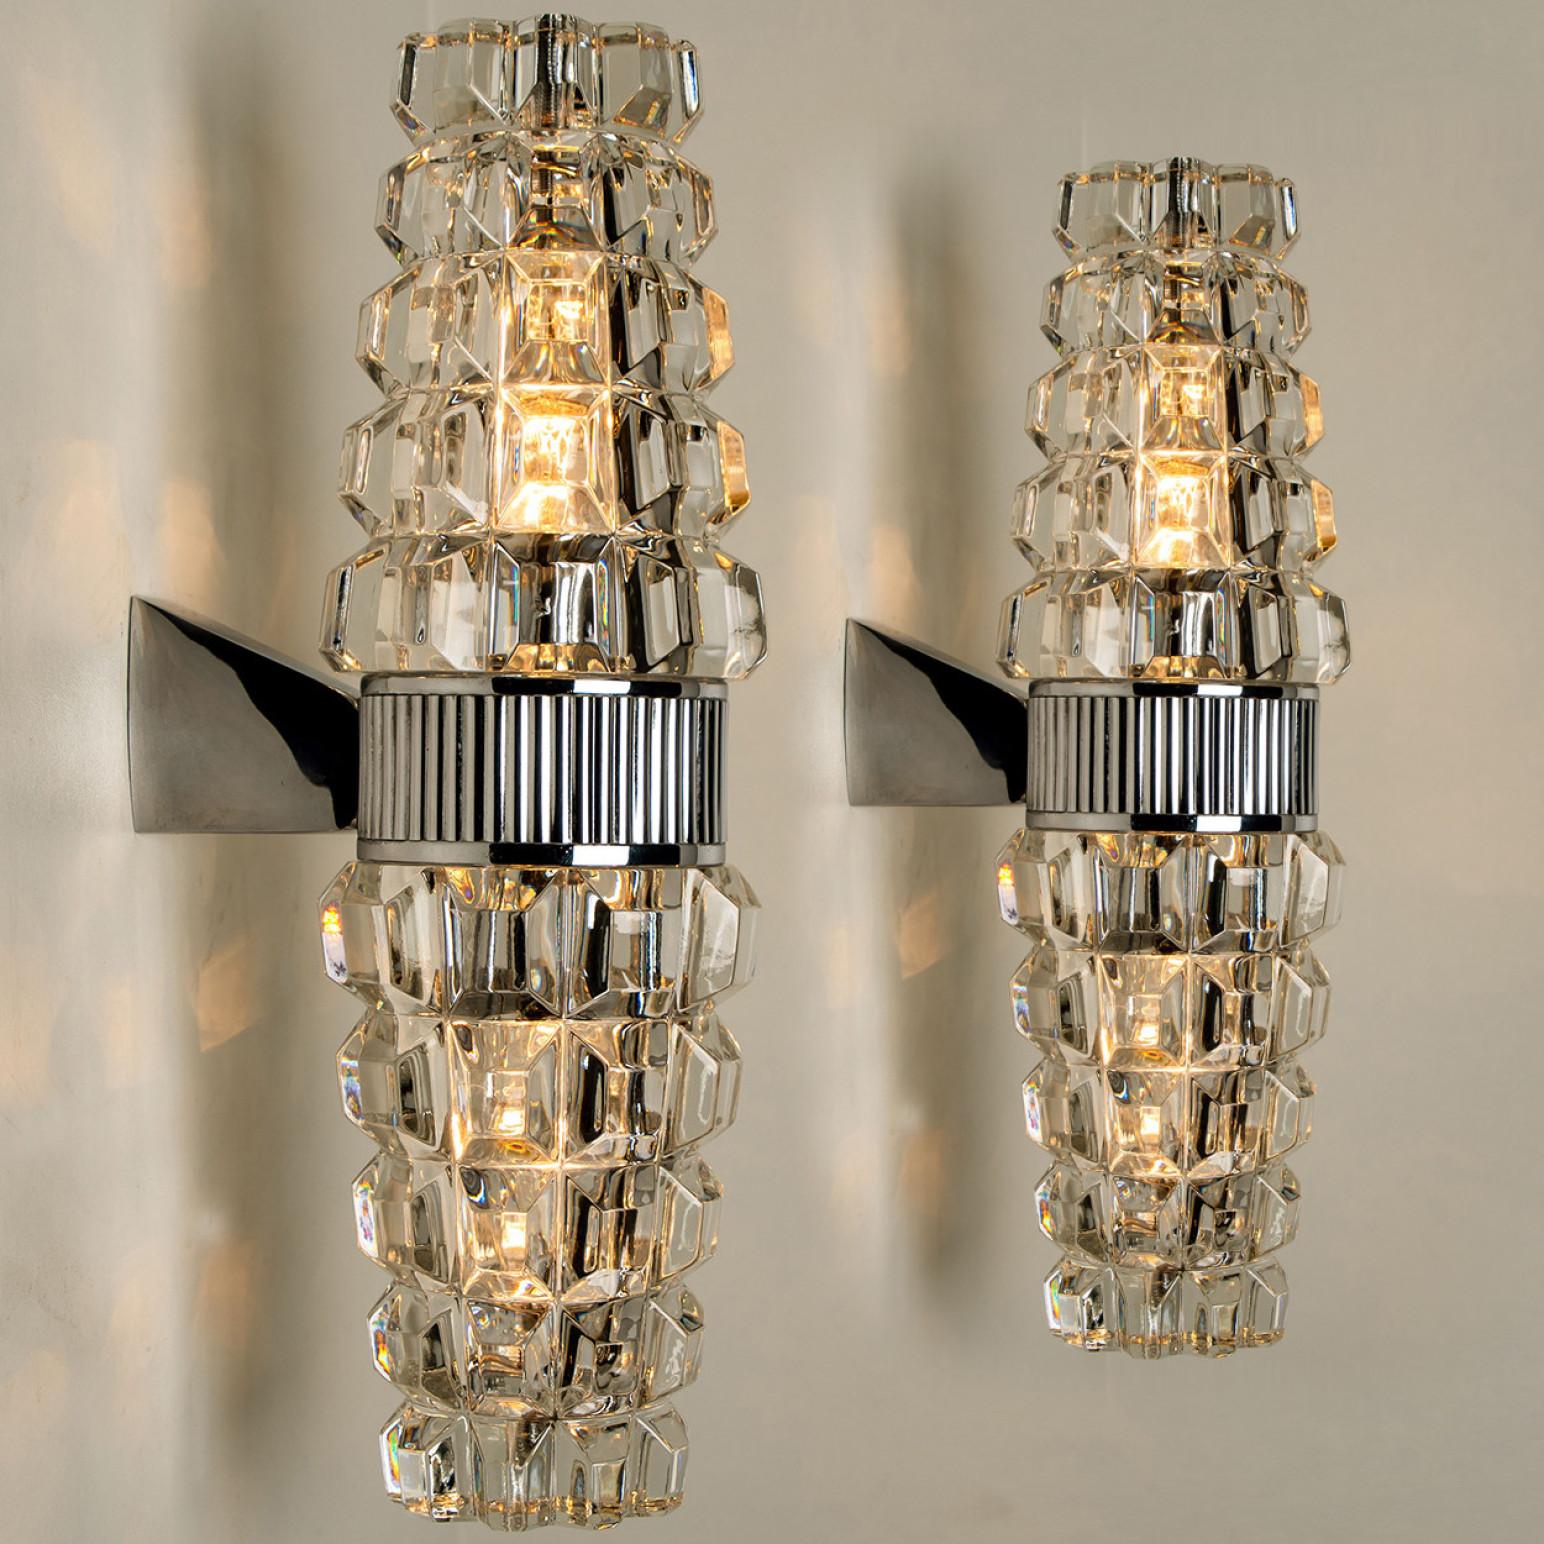 Hourglass Shaped Chrome Wallsconce, France, Europe, 1970s For Sale 1